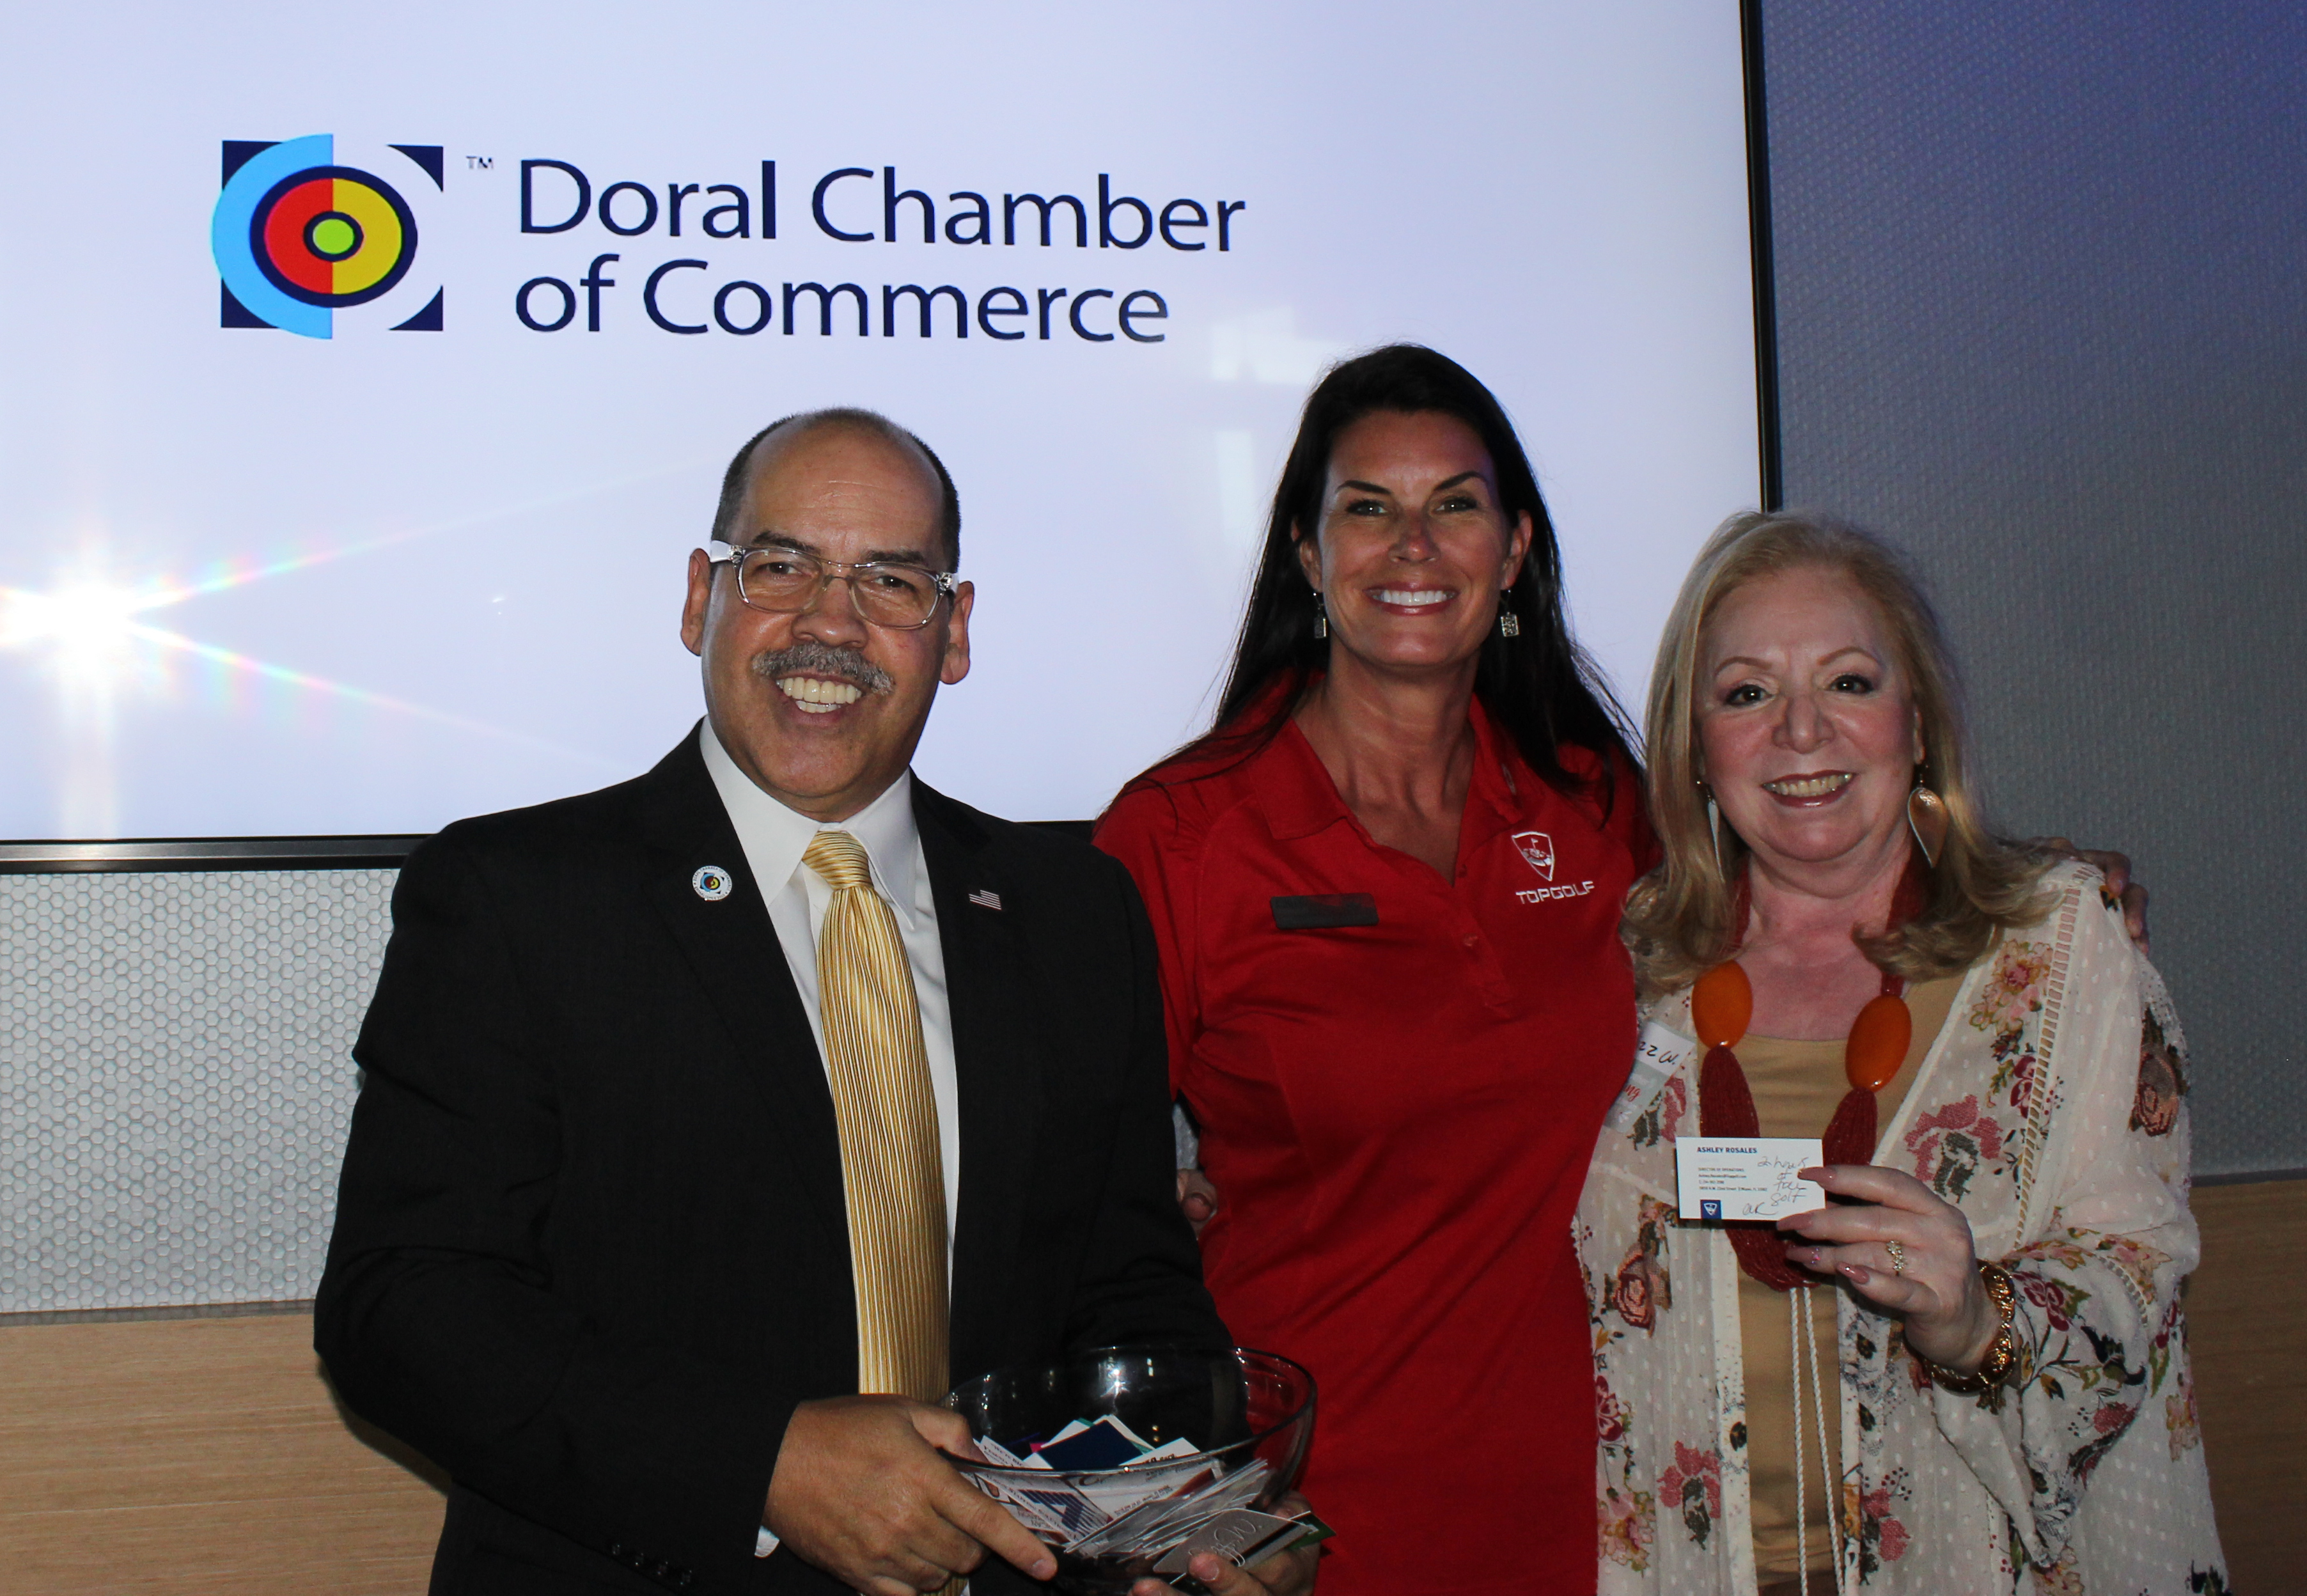 Doral Chamber of Commerce introduces Manny Sarmiento taking a group photo with Topgolf and The Miami Group at the Luncheon Networking Event.